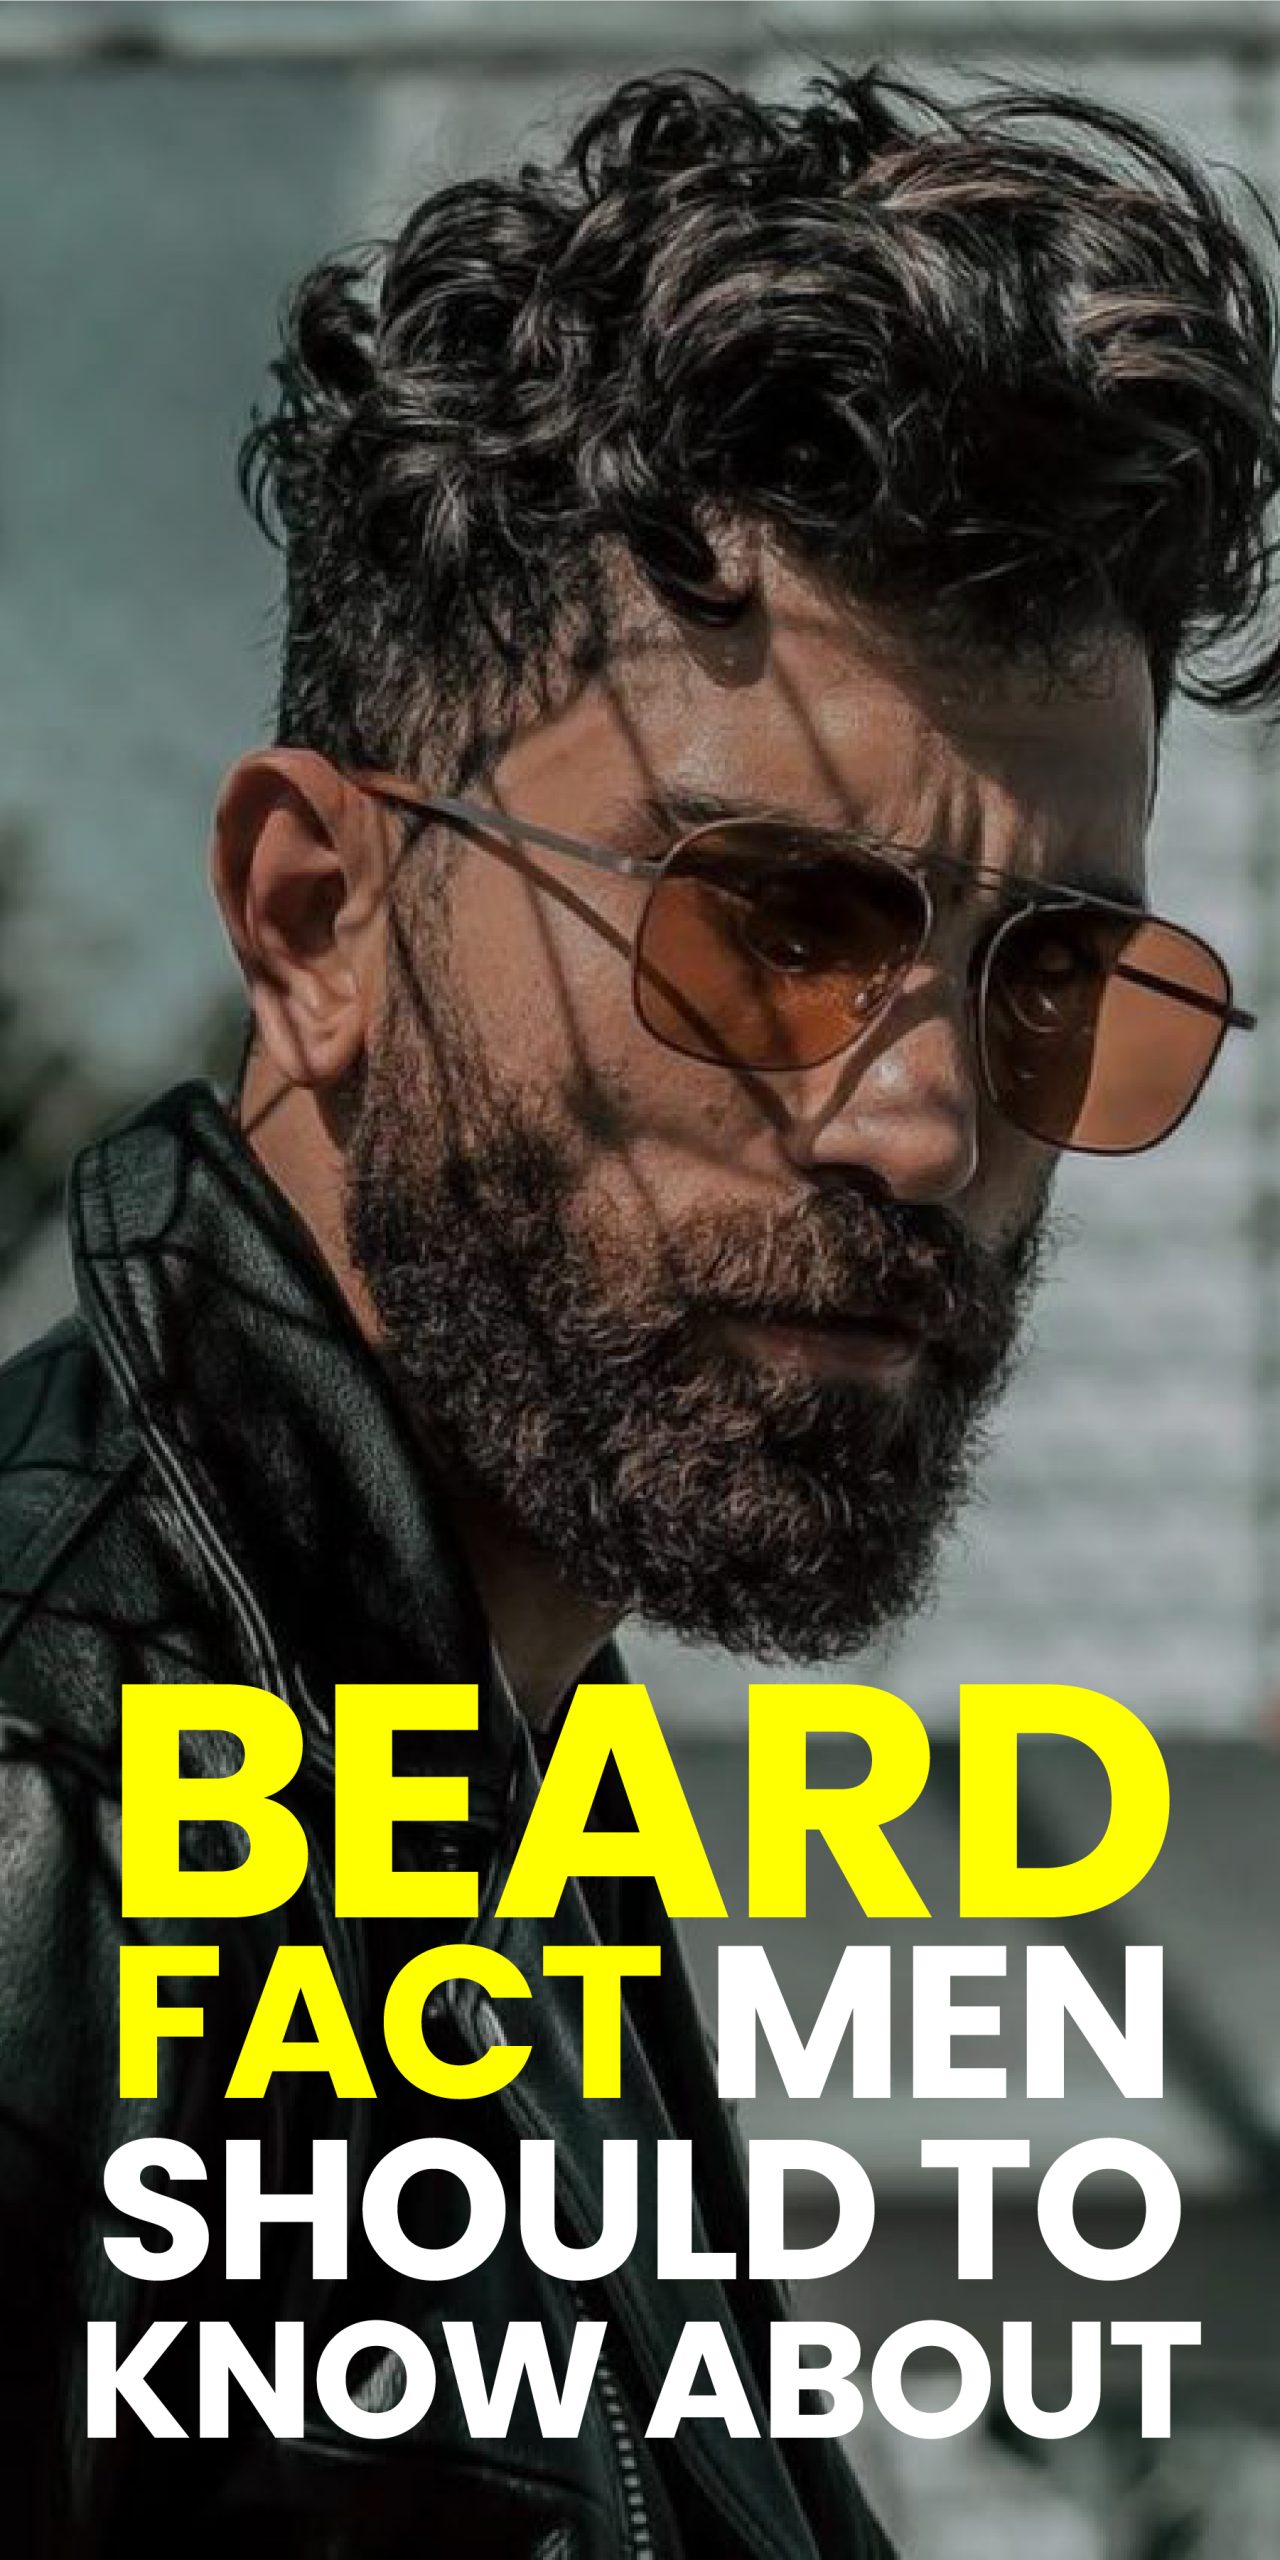 BEARD FACT MEN SHOULD TO KNOW ABOUT